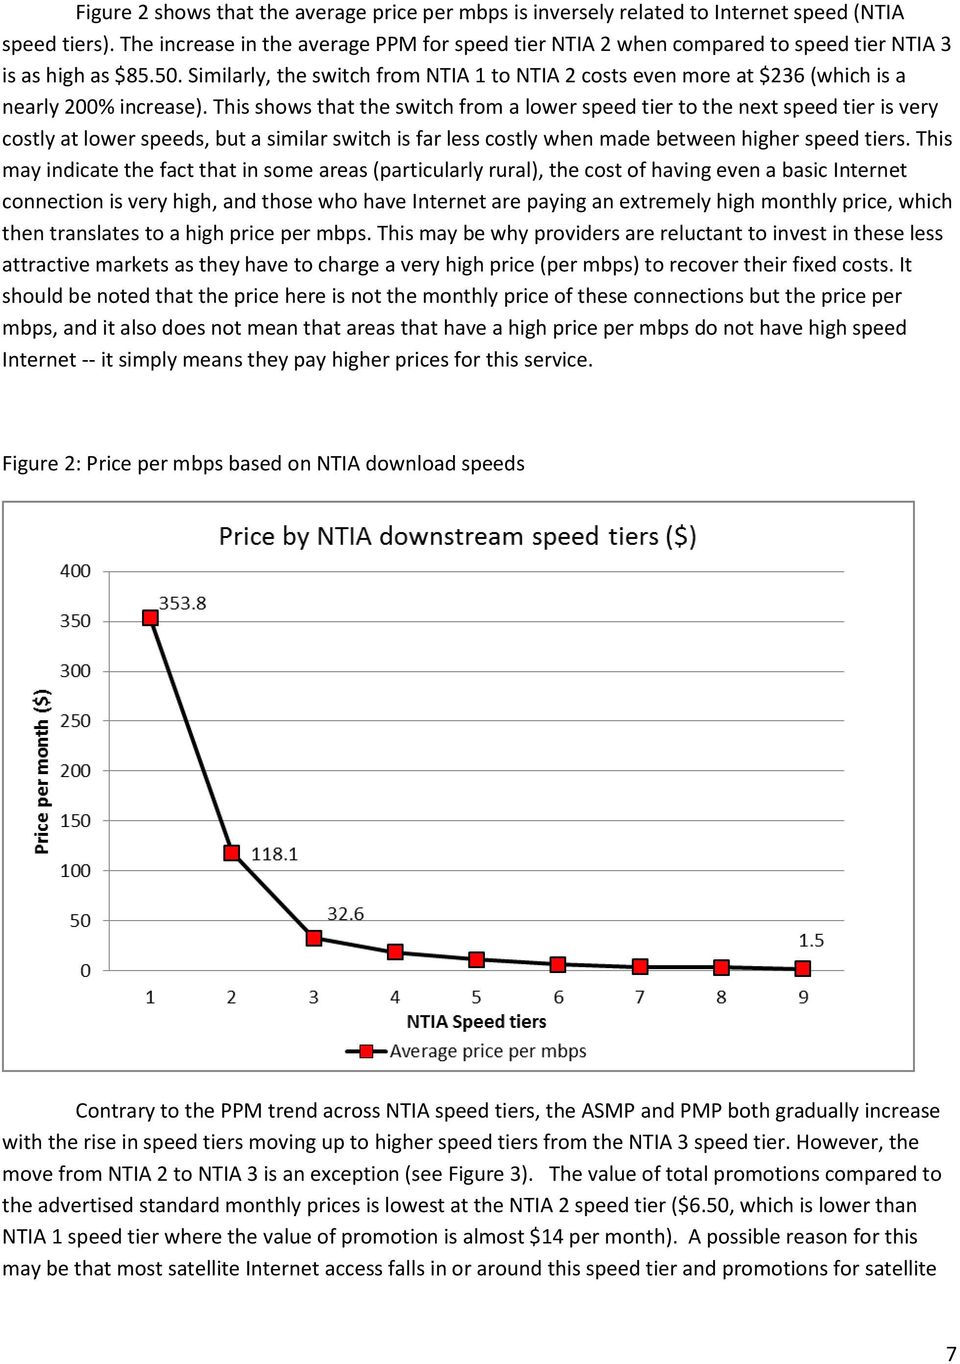 Similarly, the switch from NTIA 1 to NTIA 2 costs even more at $236 (which is a nearly 200% increase).